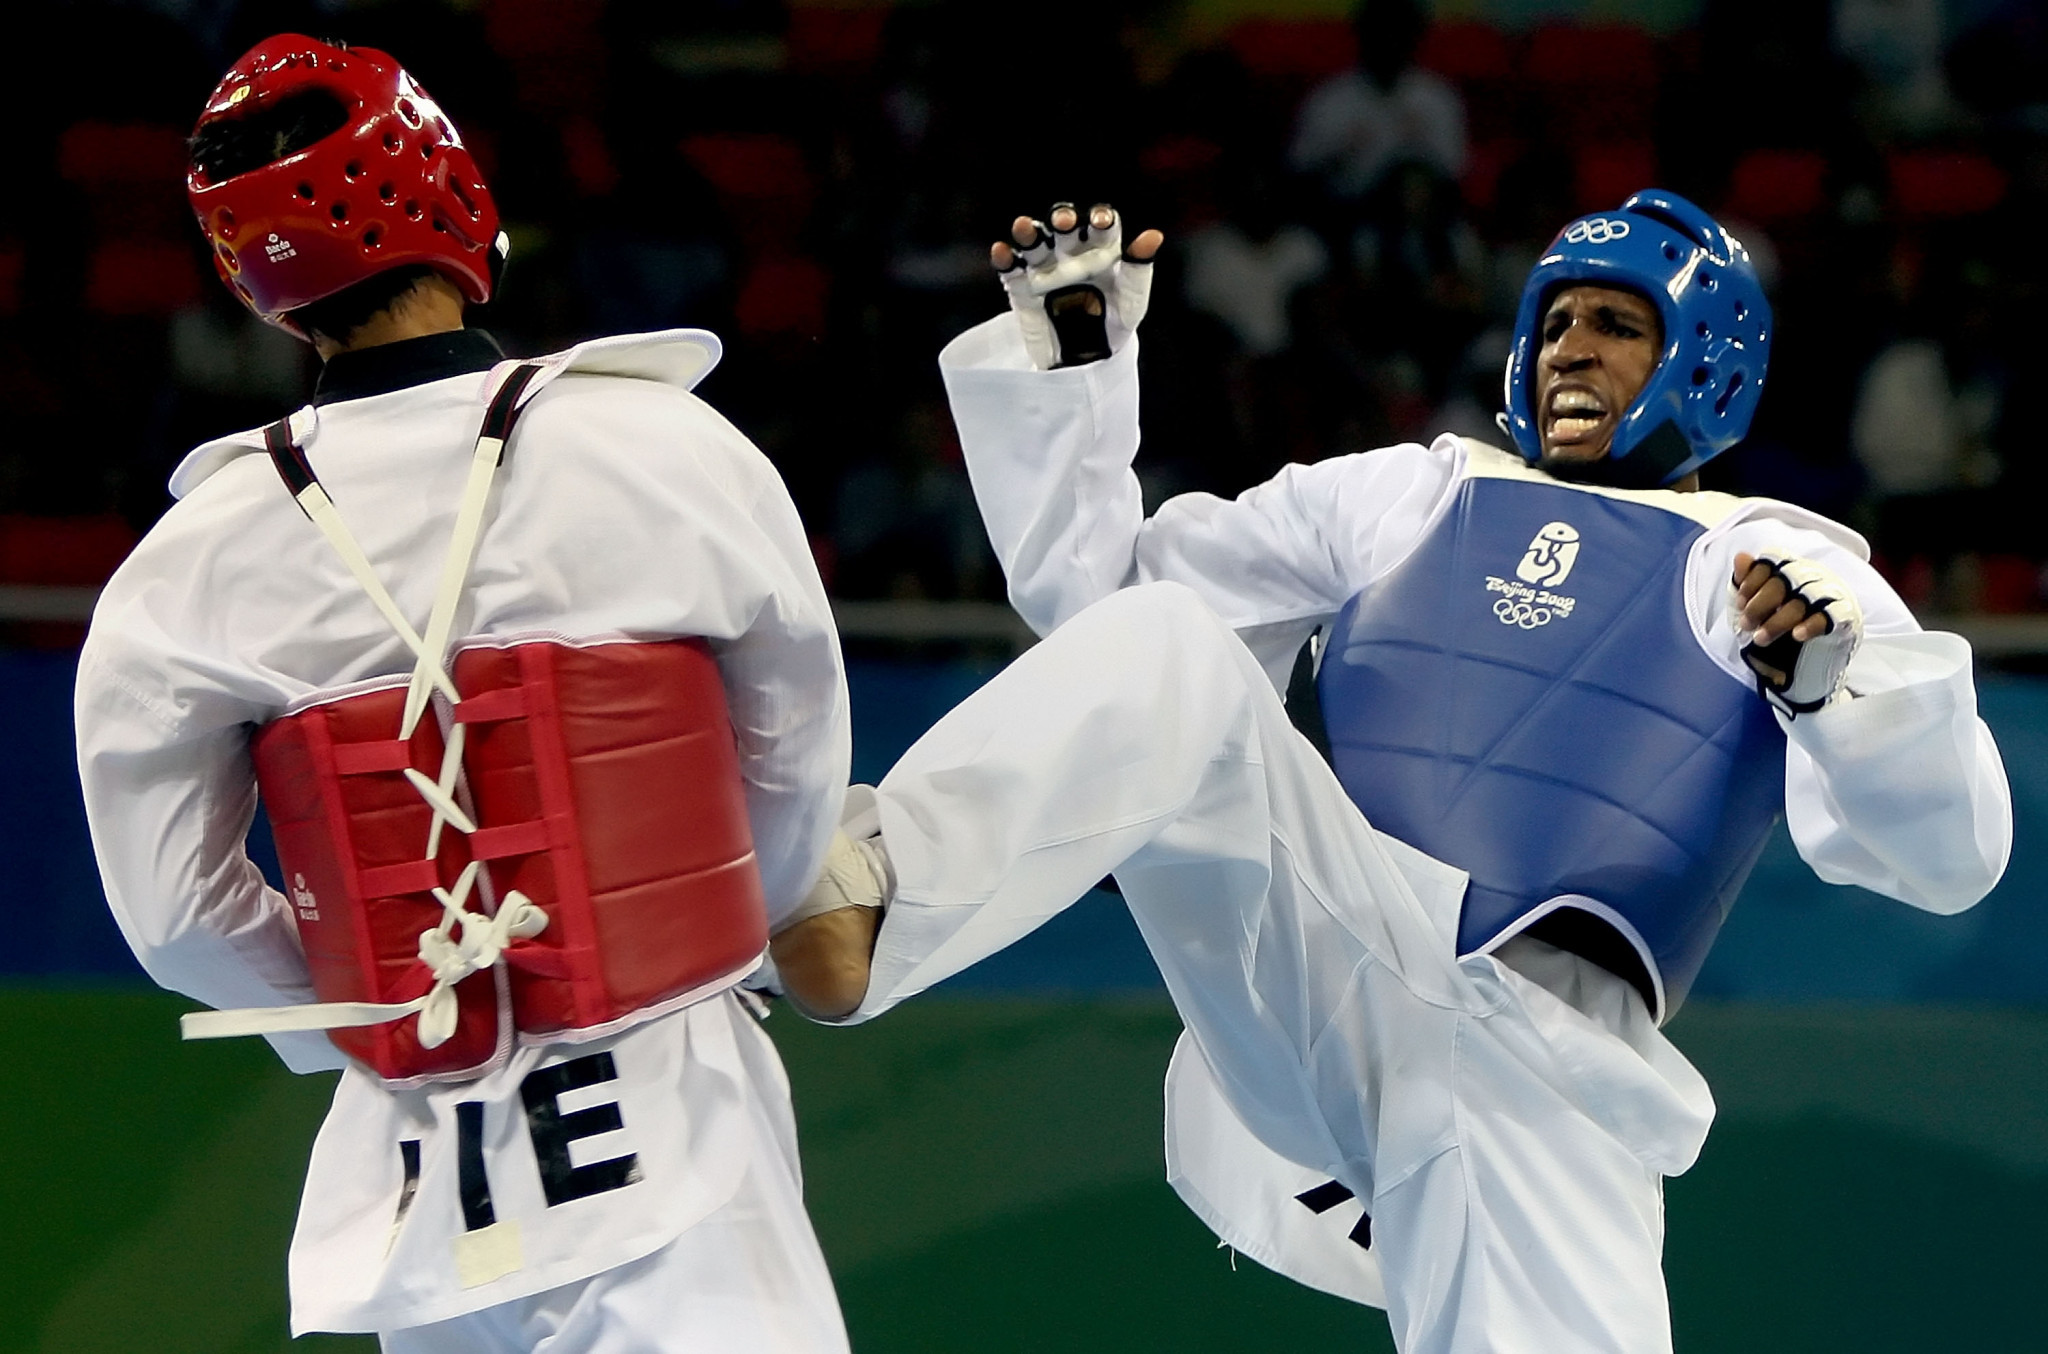 Chika Chukwumerije, right, has quit taekwondo so the case against him has been closed ©Getty Images